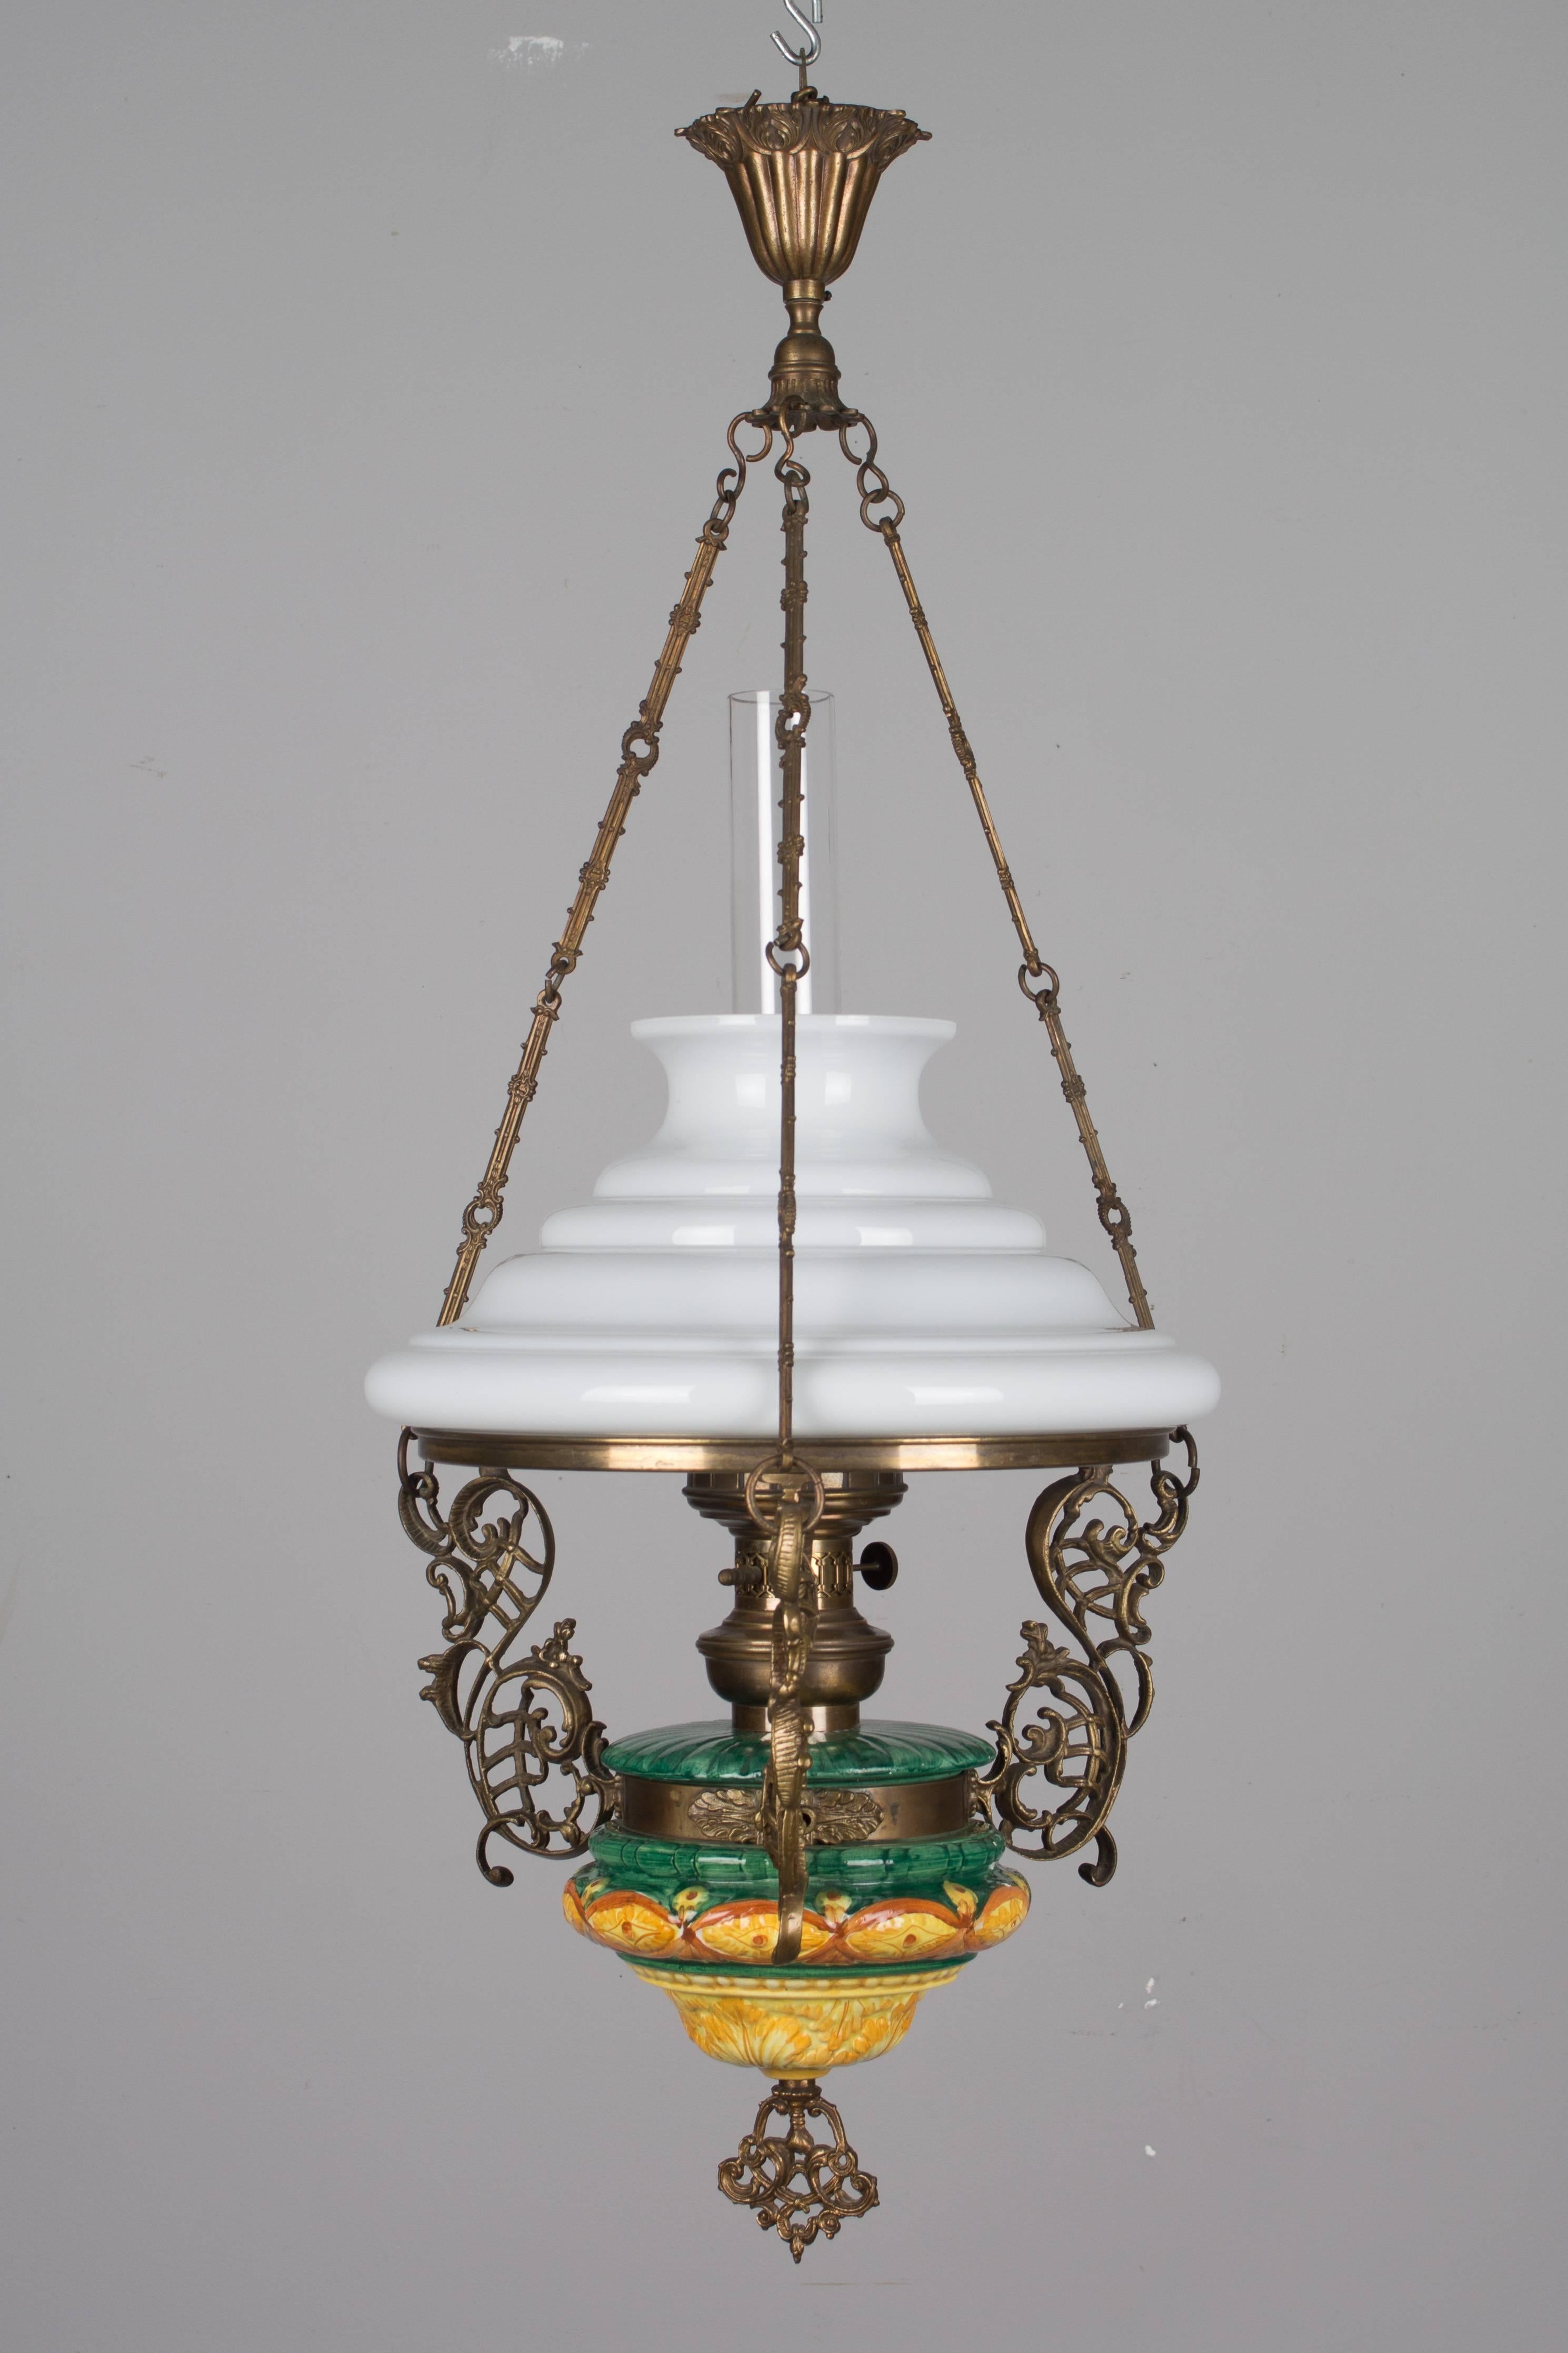 A charming 19th century Country French hanging oil lamp. Bronze and ceramic with glass shade and chimney. May be wired and converted to electric. Measures: 35" height (to top of canopy) x 15" diameter. In excellent condition with only a